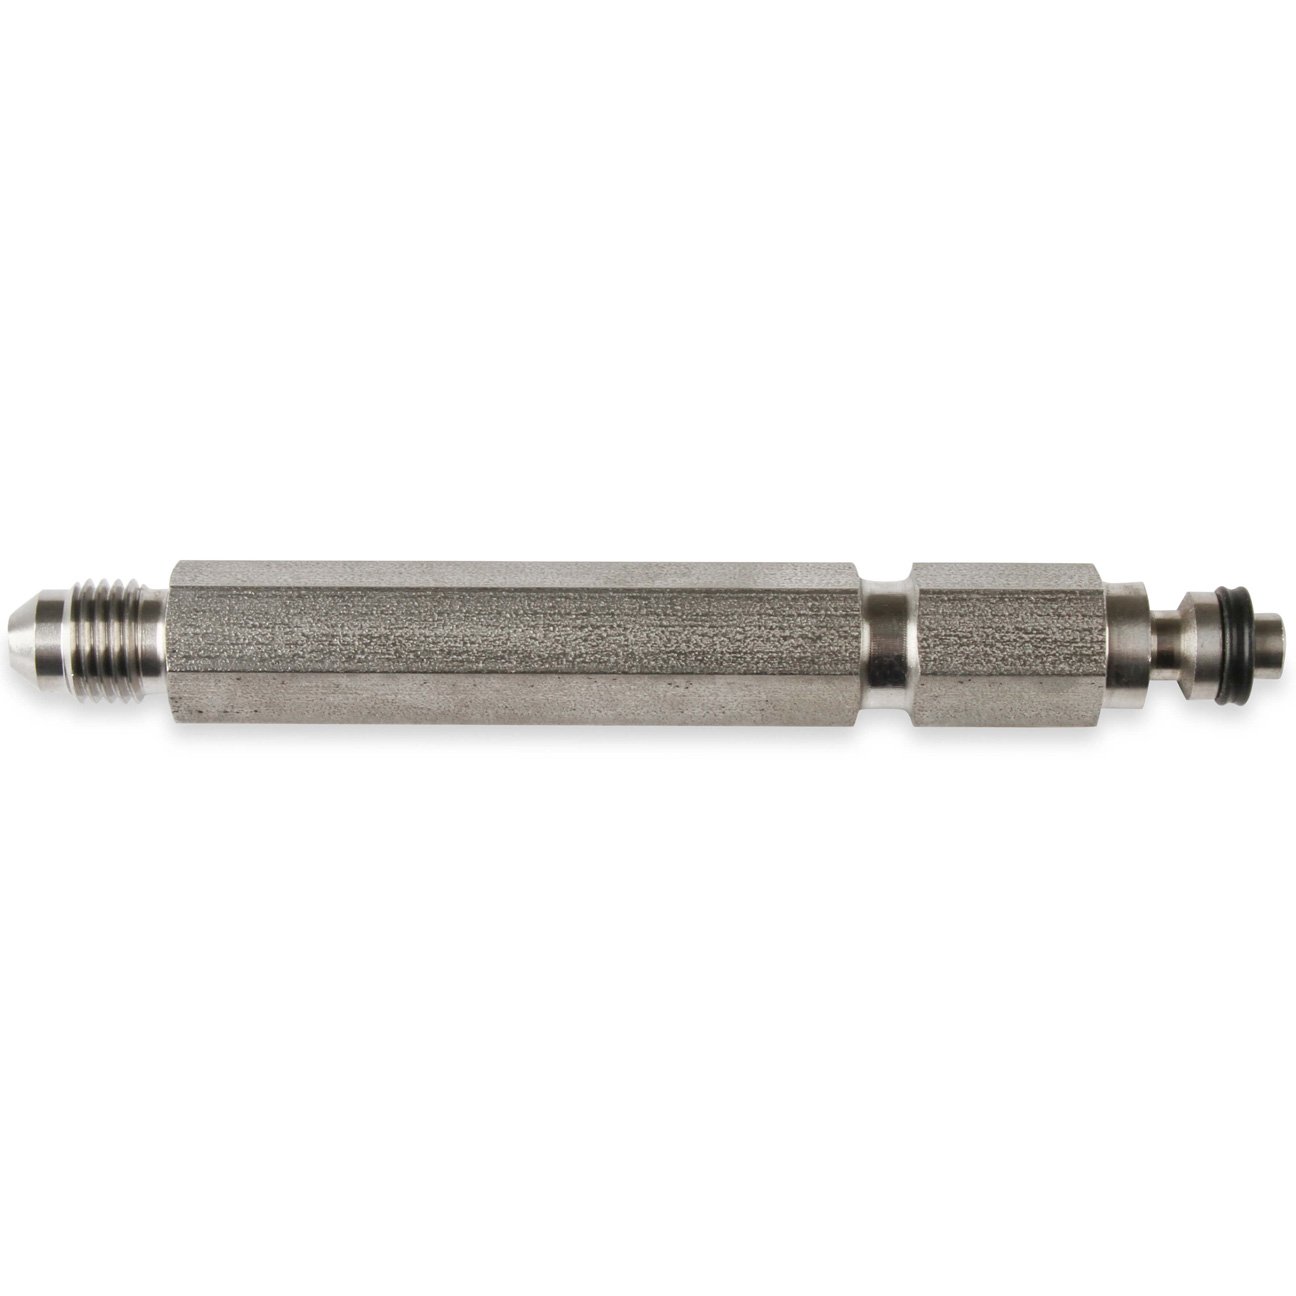 Long-Style Clutch Adapter Fitting